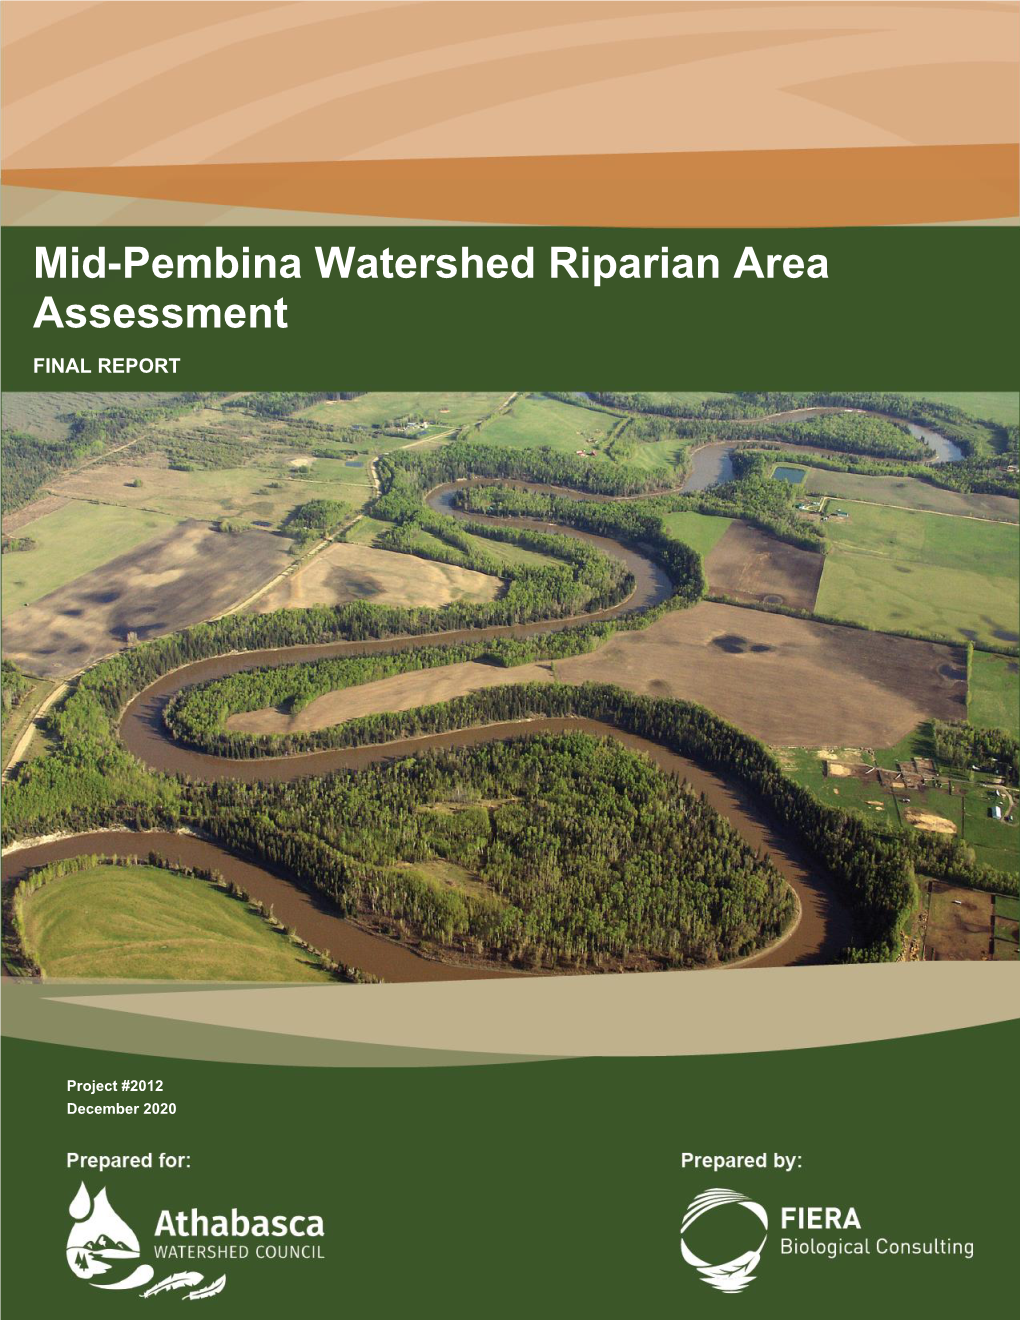 Mid-Pembina Watershed Riparian Area Assessment